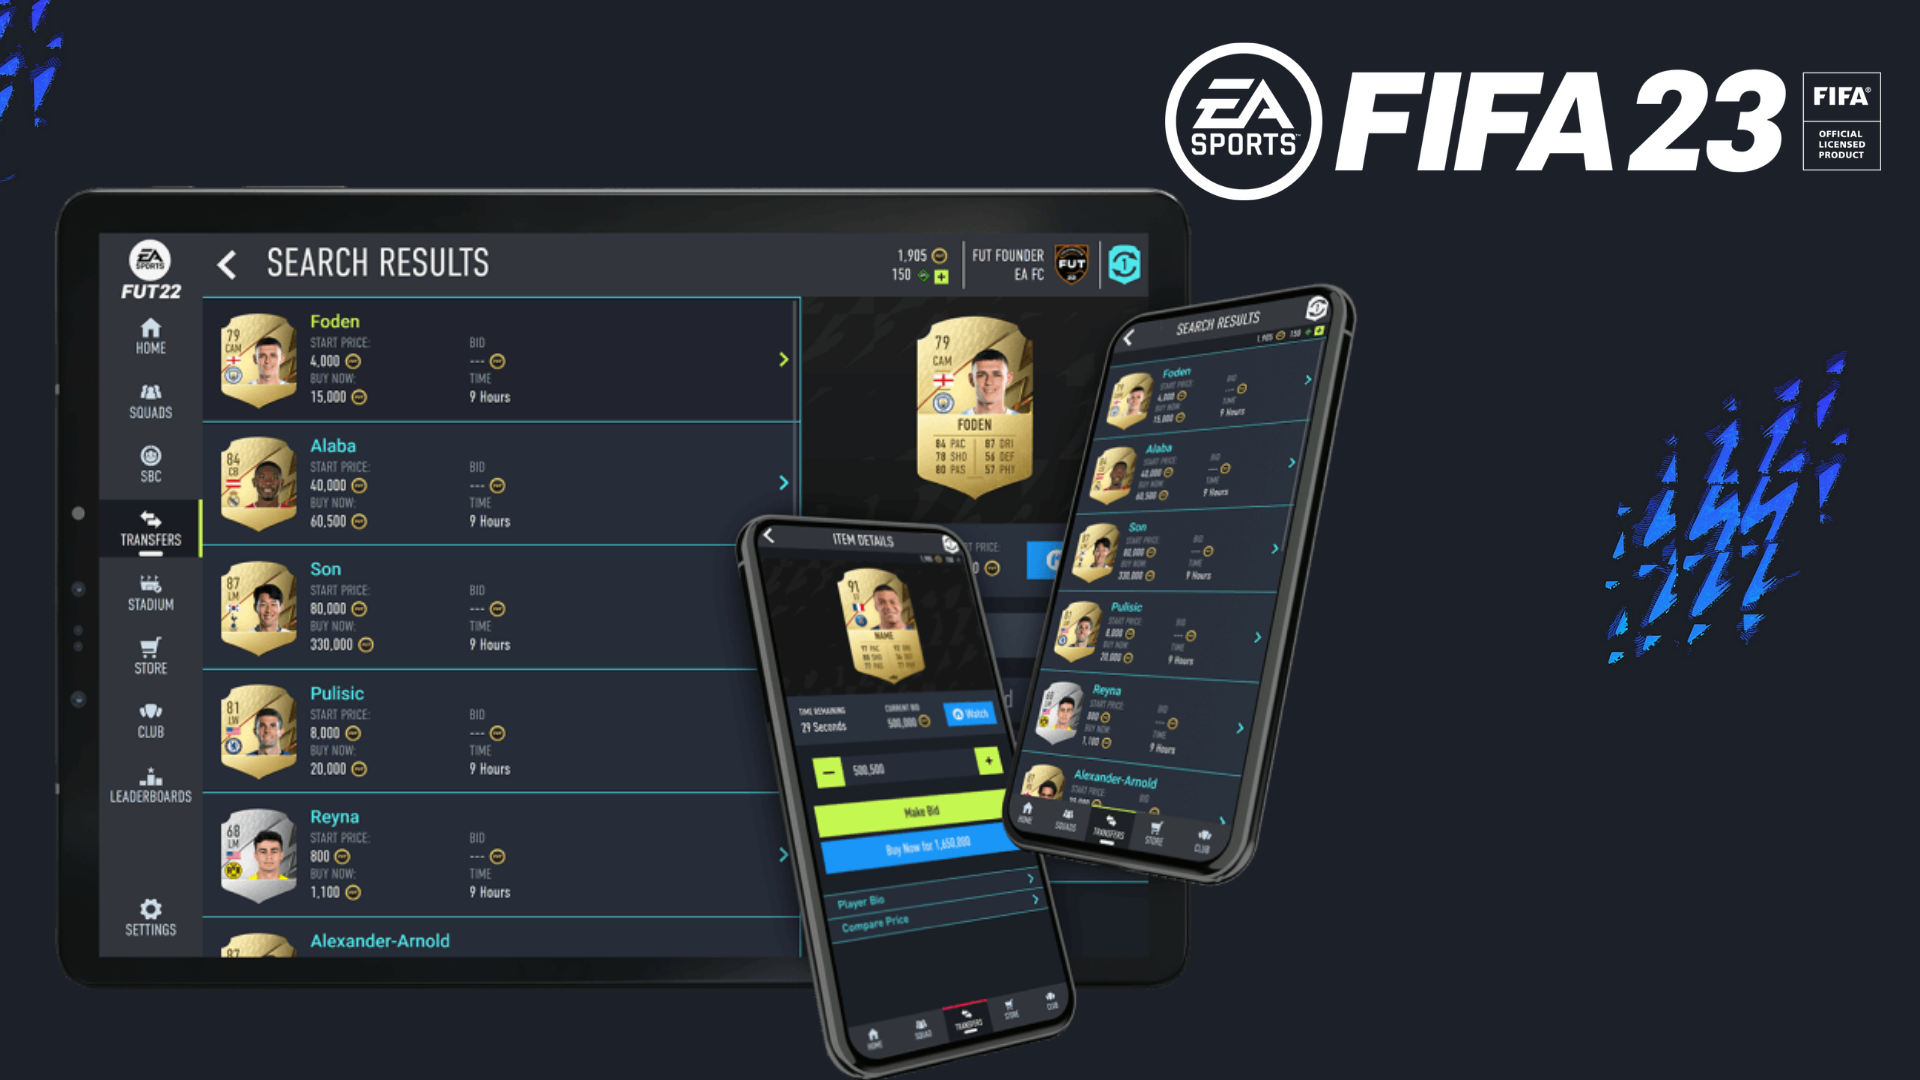 ShpFutCoin on X: Fifa 23 Ps platform account for sale PRİCE 60 € 🔊🔊🔊 -  All player is untradeable - web app transfer market is open. - 84K Fifa  Coins Those who